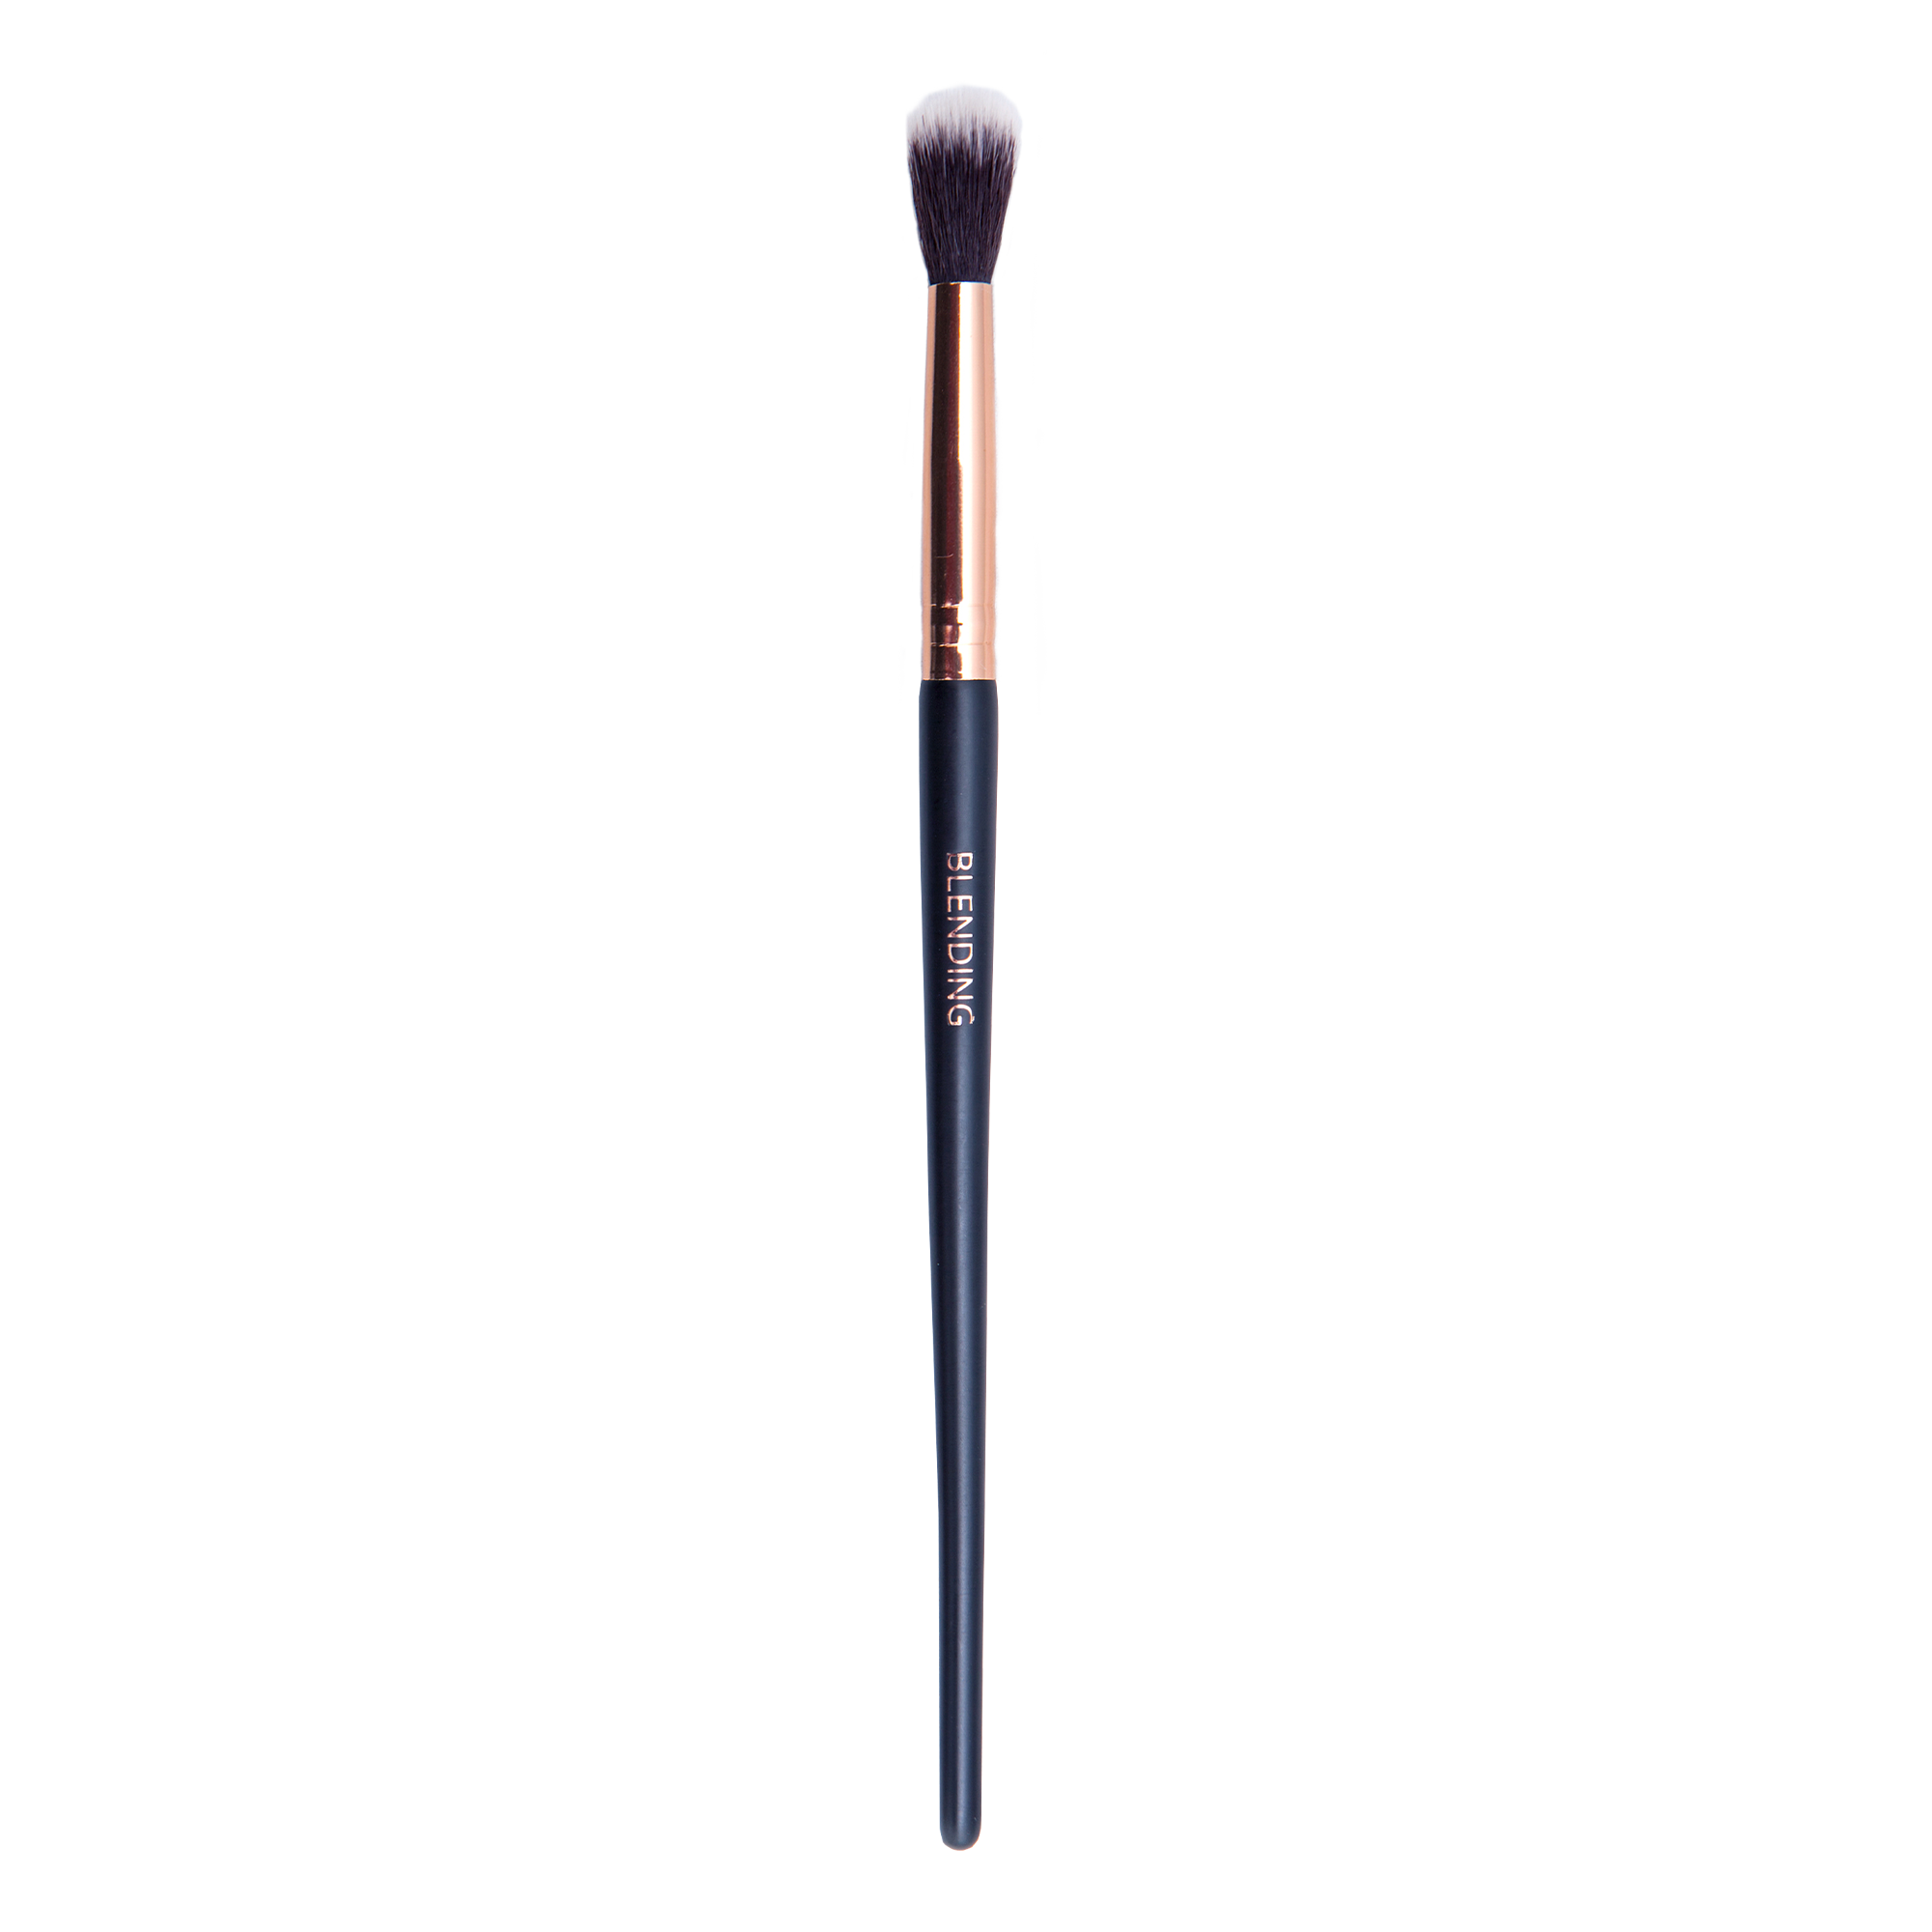 Bolver Eyeshadow Brushes - Designed for Flawless and Professional Eye Makeup application. Must-Have Brushes for Smoky Eyes, Blending and Detailing